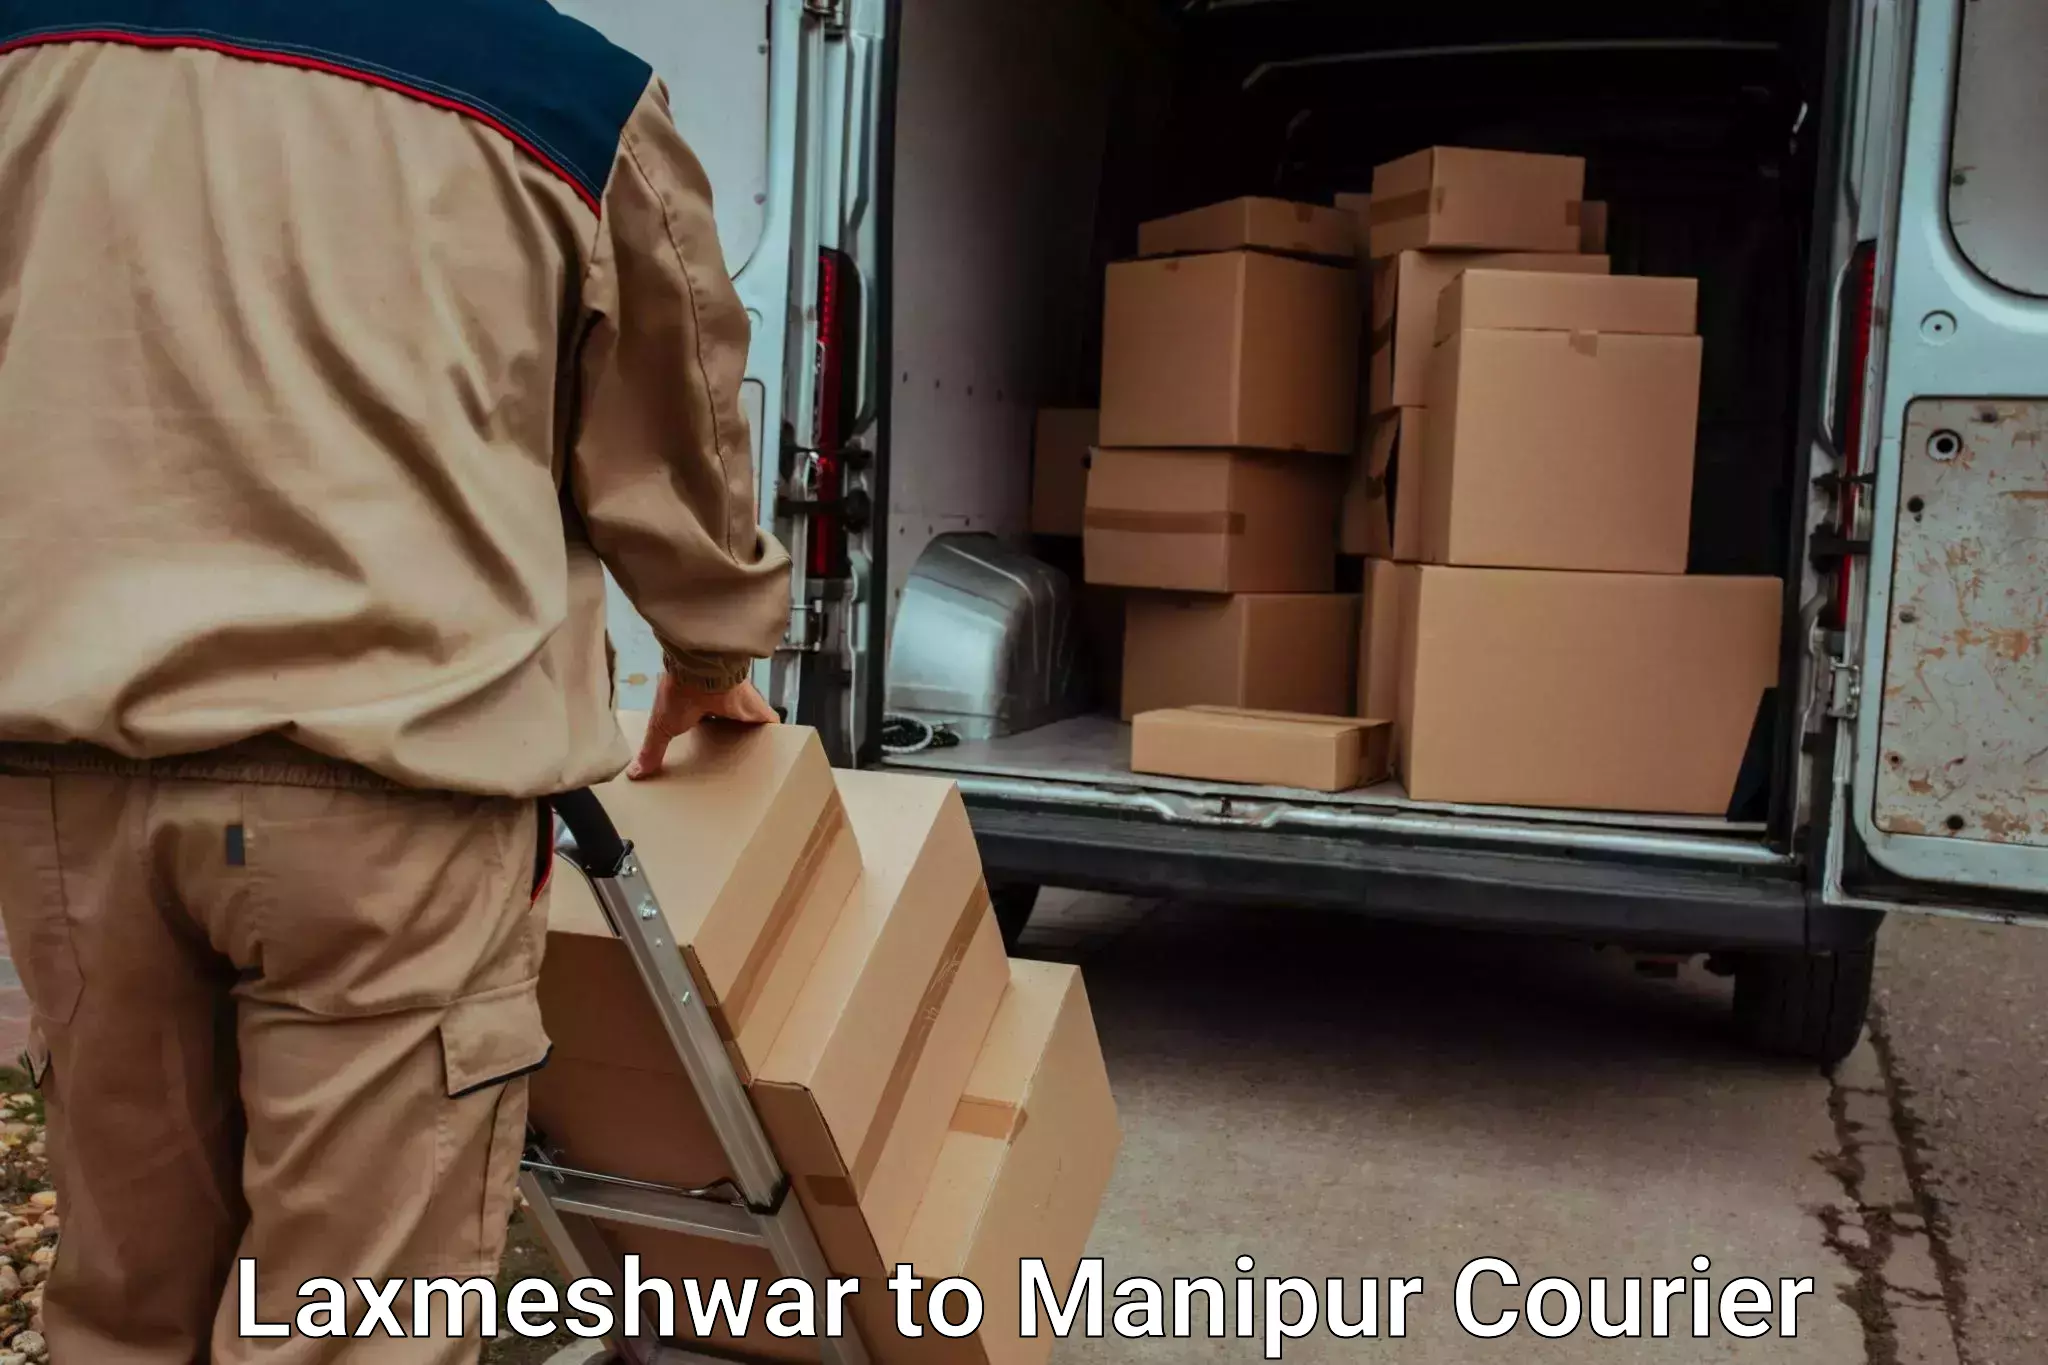 Luggage shipment specialists Laxmeshwar to Manipur